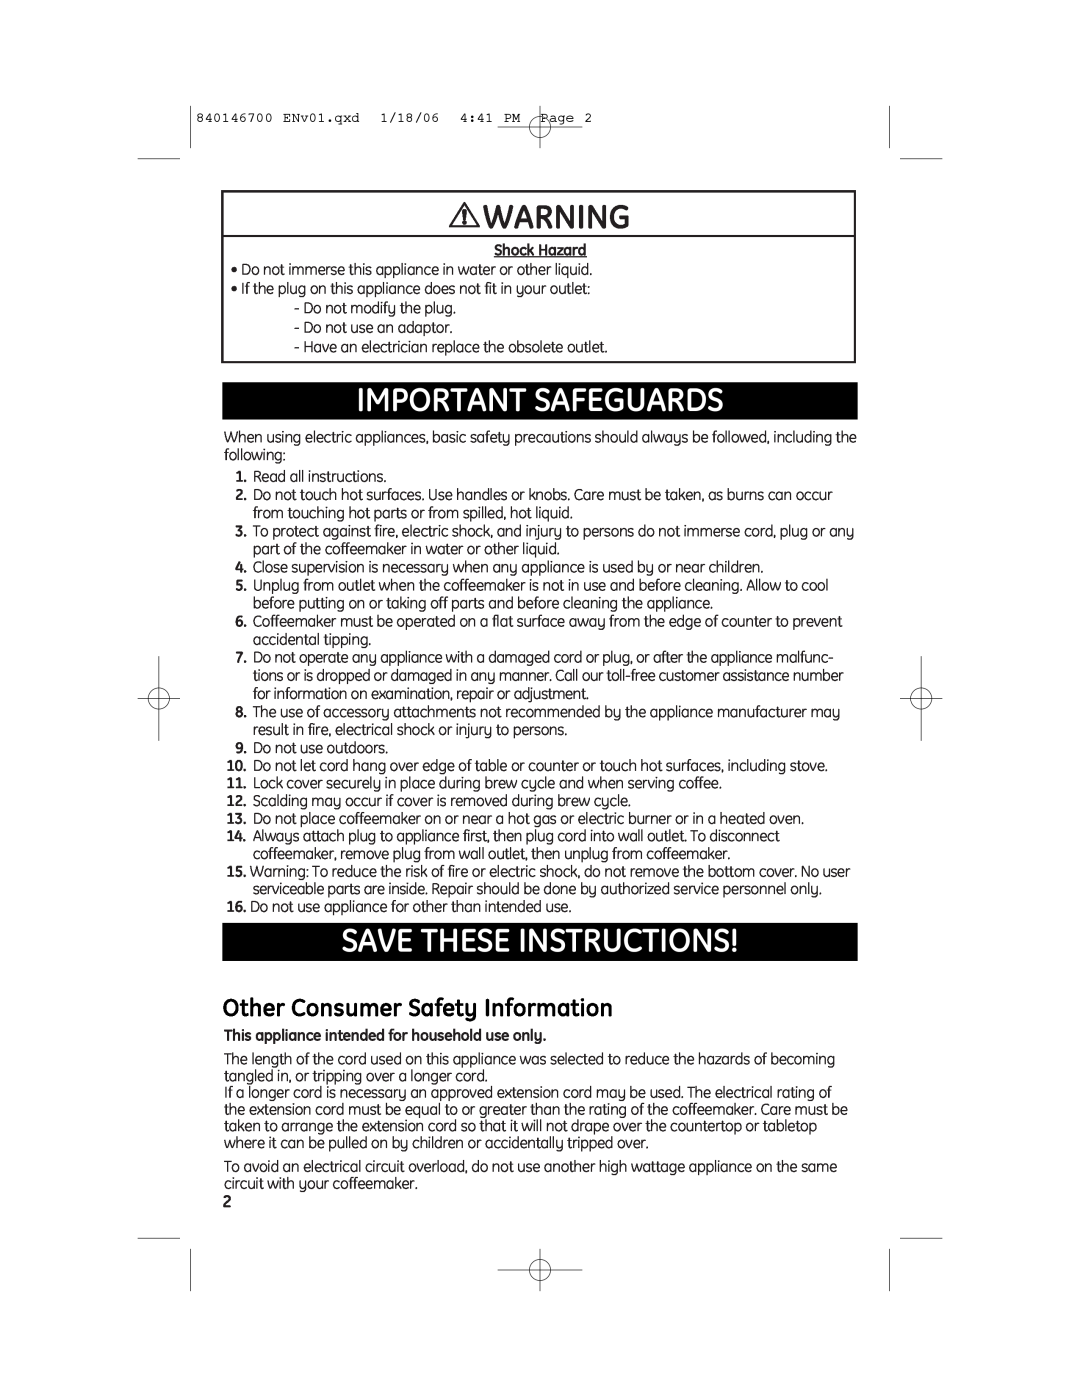 GE 840146700, 106840 manual Important Safeguards, Save These Instructions, Other Consumer Safety Information, Shock Hazard 